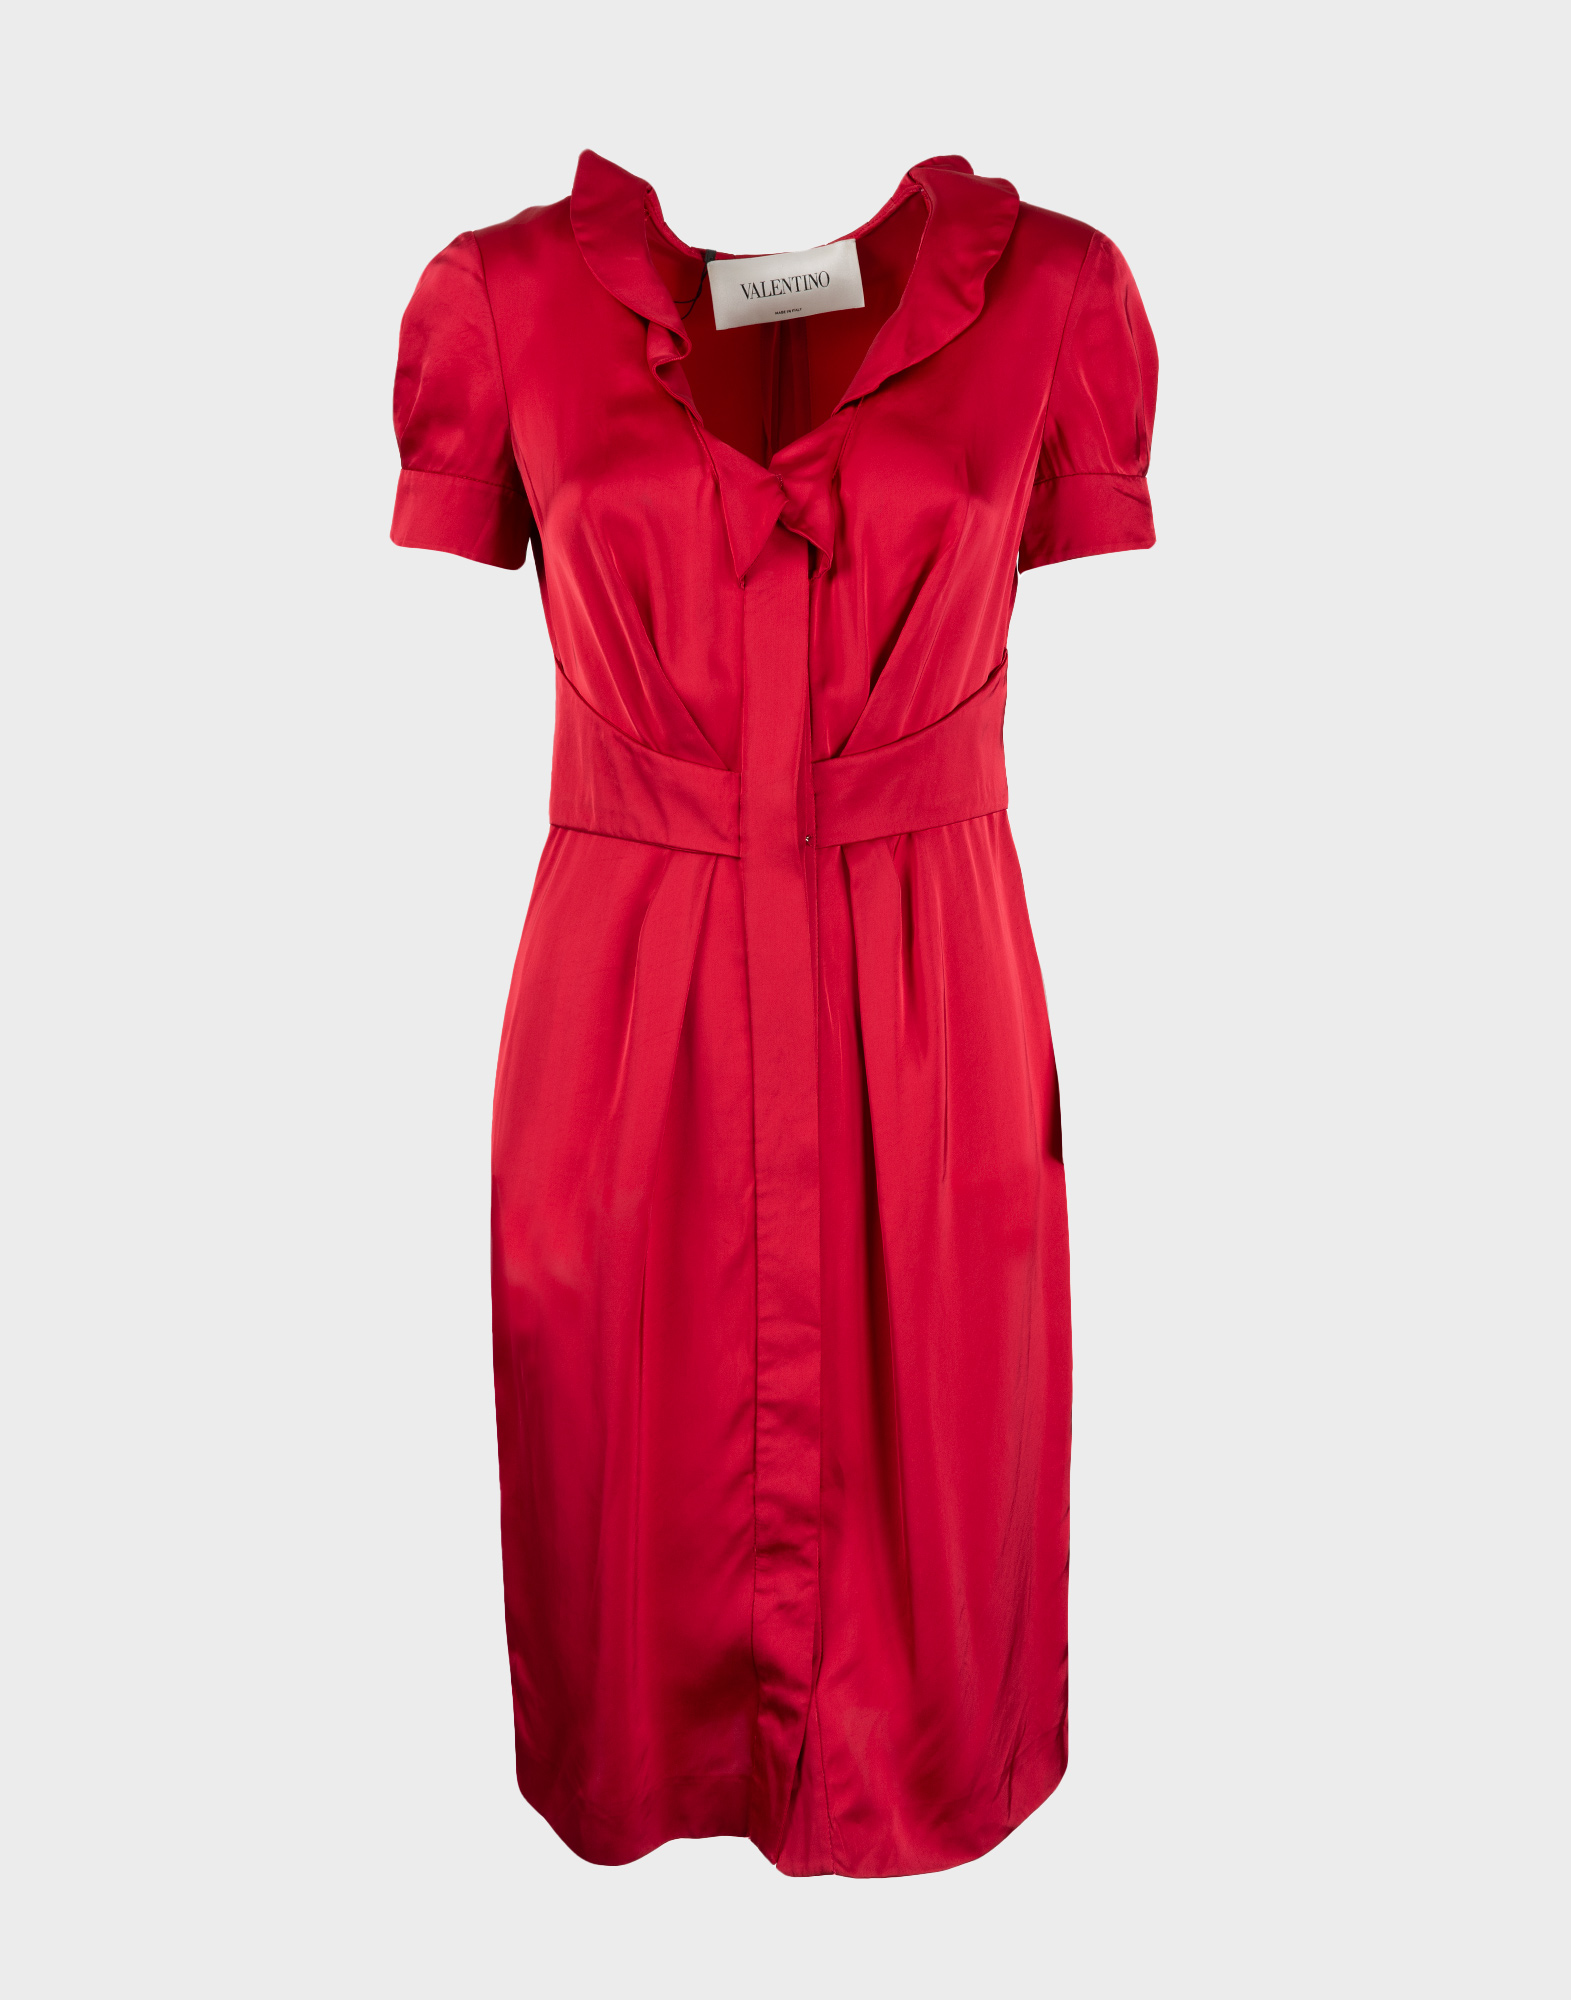 cherry-coloured women's chemisier dress, front fastening with concealed buttons, ruffles on the neckline and short sleeves